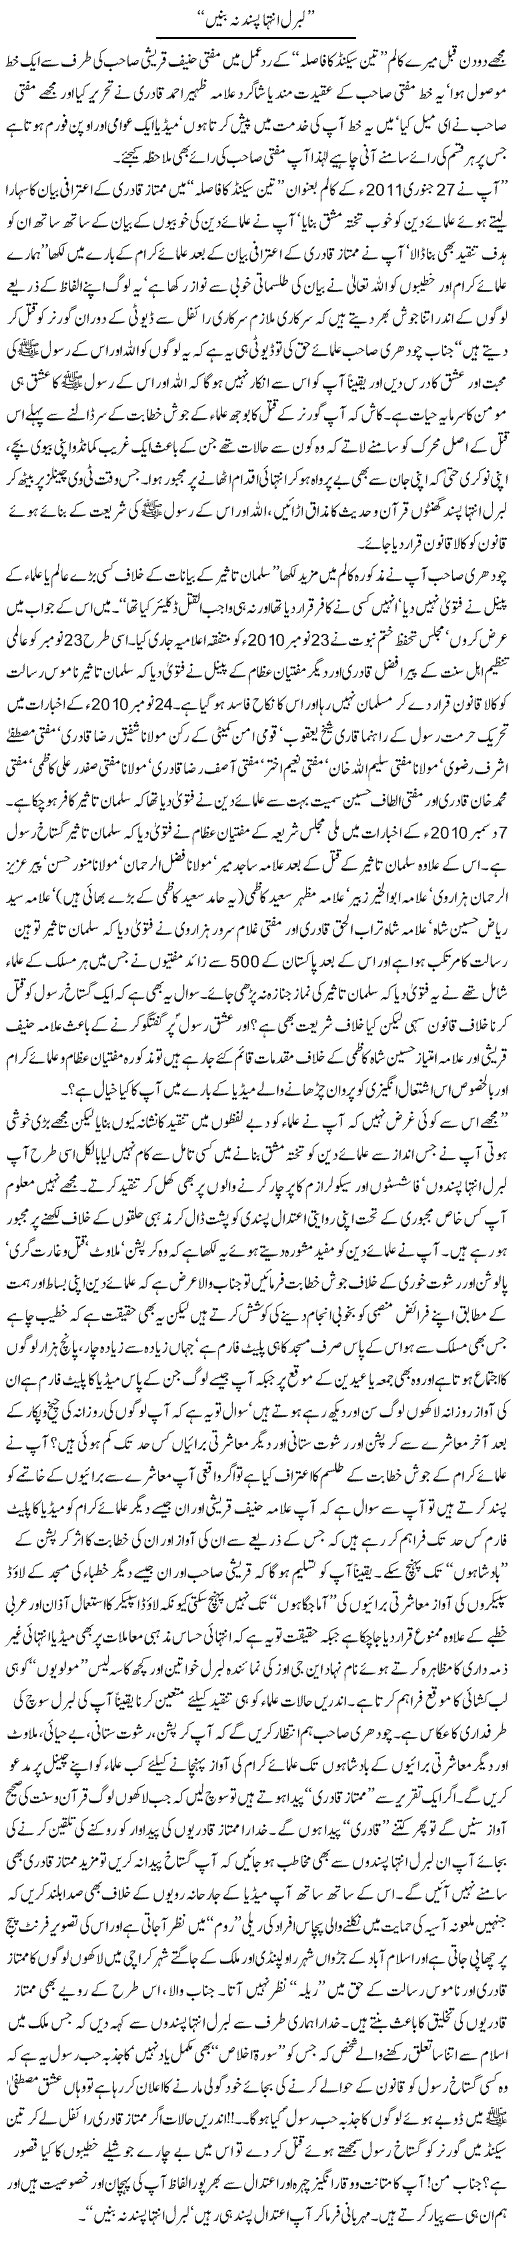 Liberal Extremists Express Column Javed Chaudhry 1 February 2011